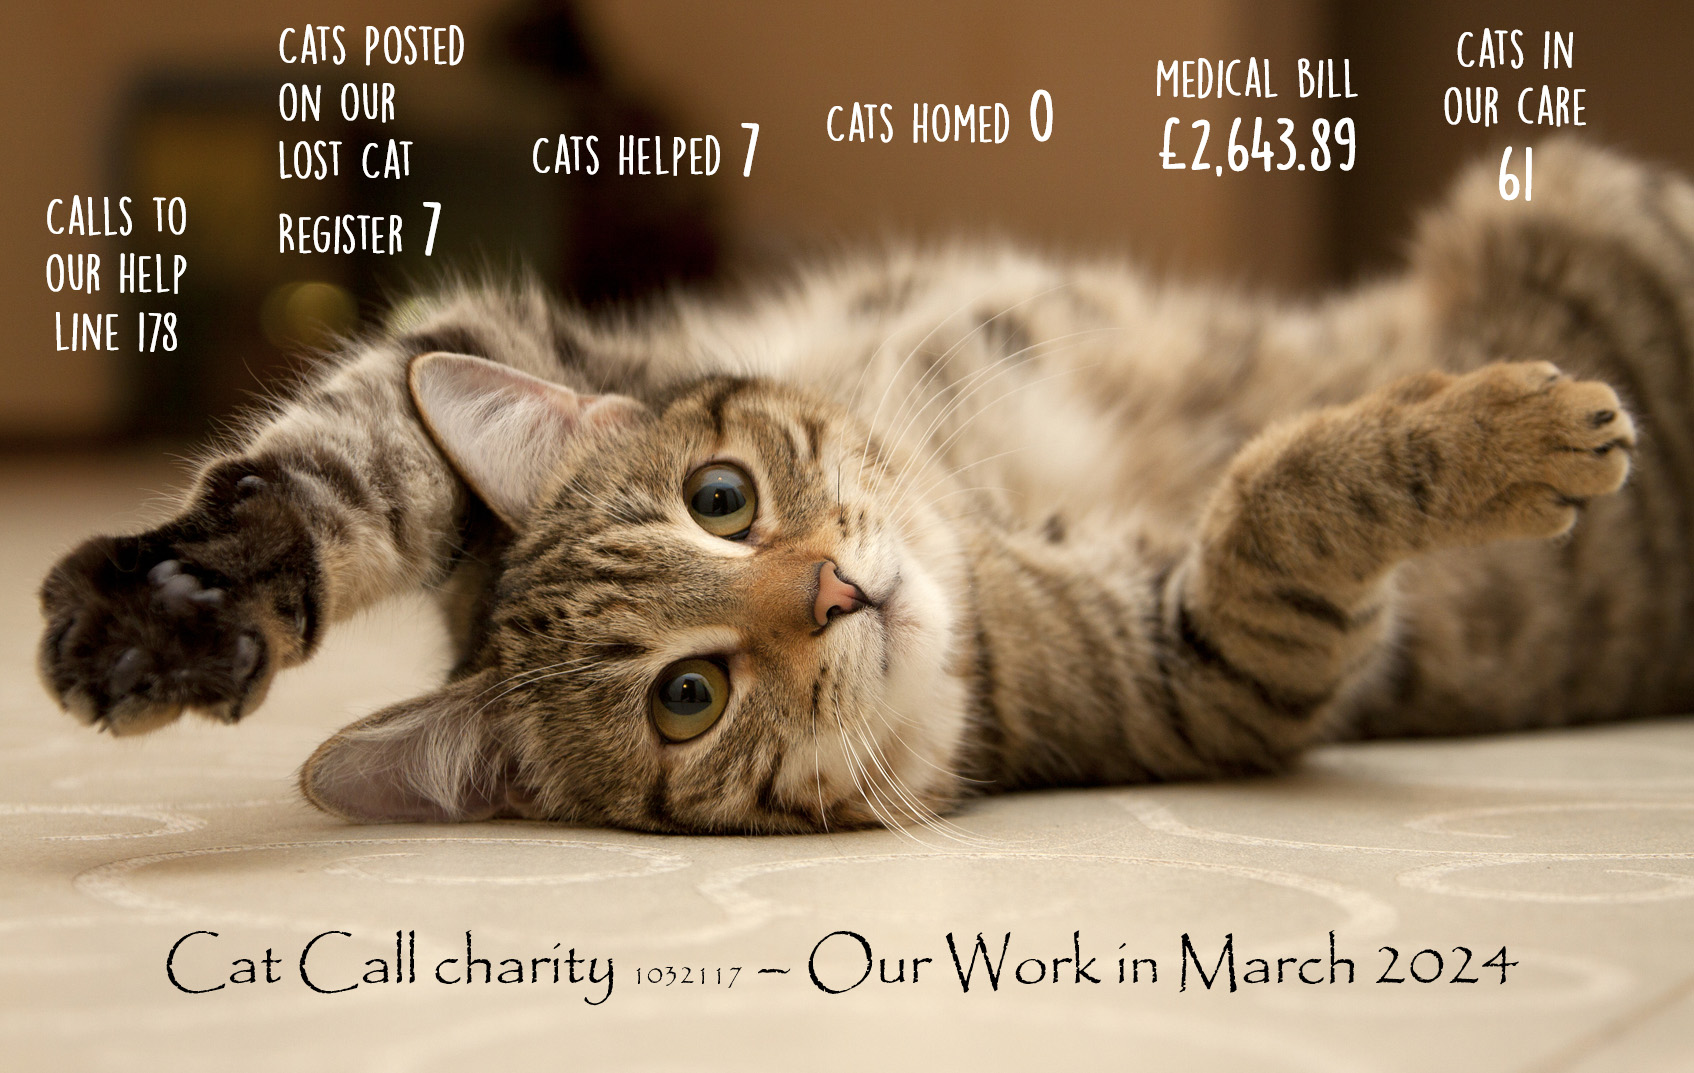 Cat Call charity caring for Cats in need